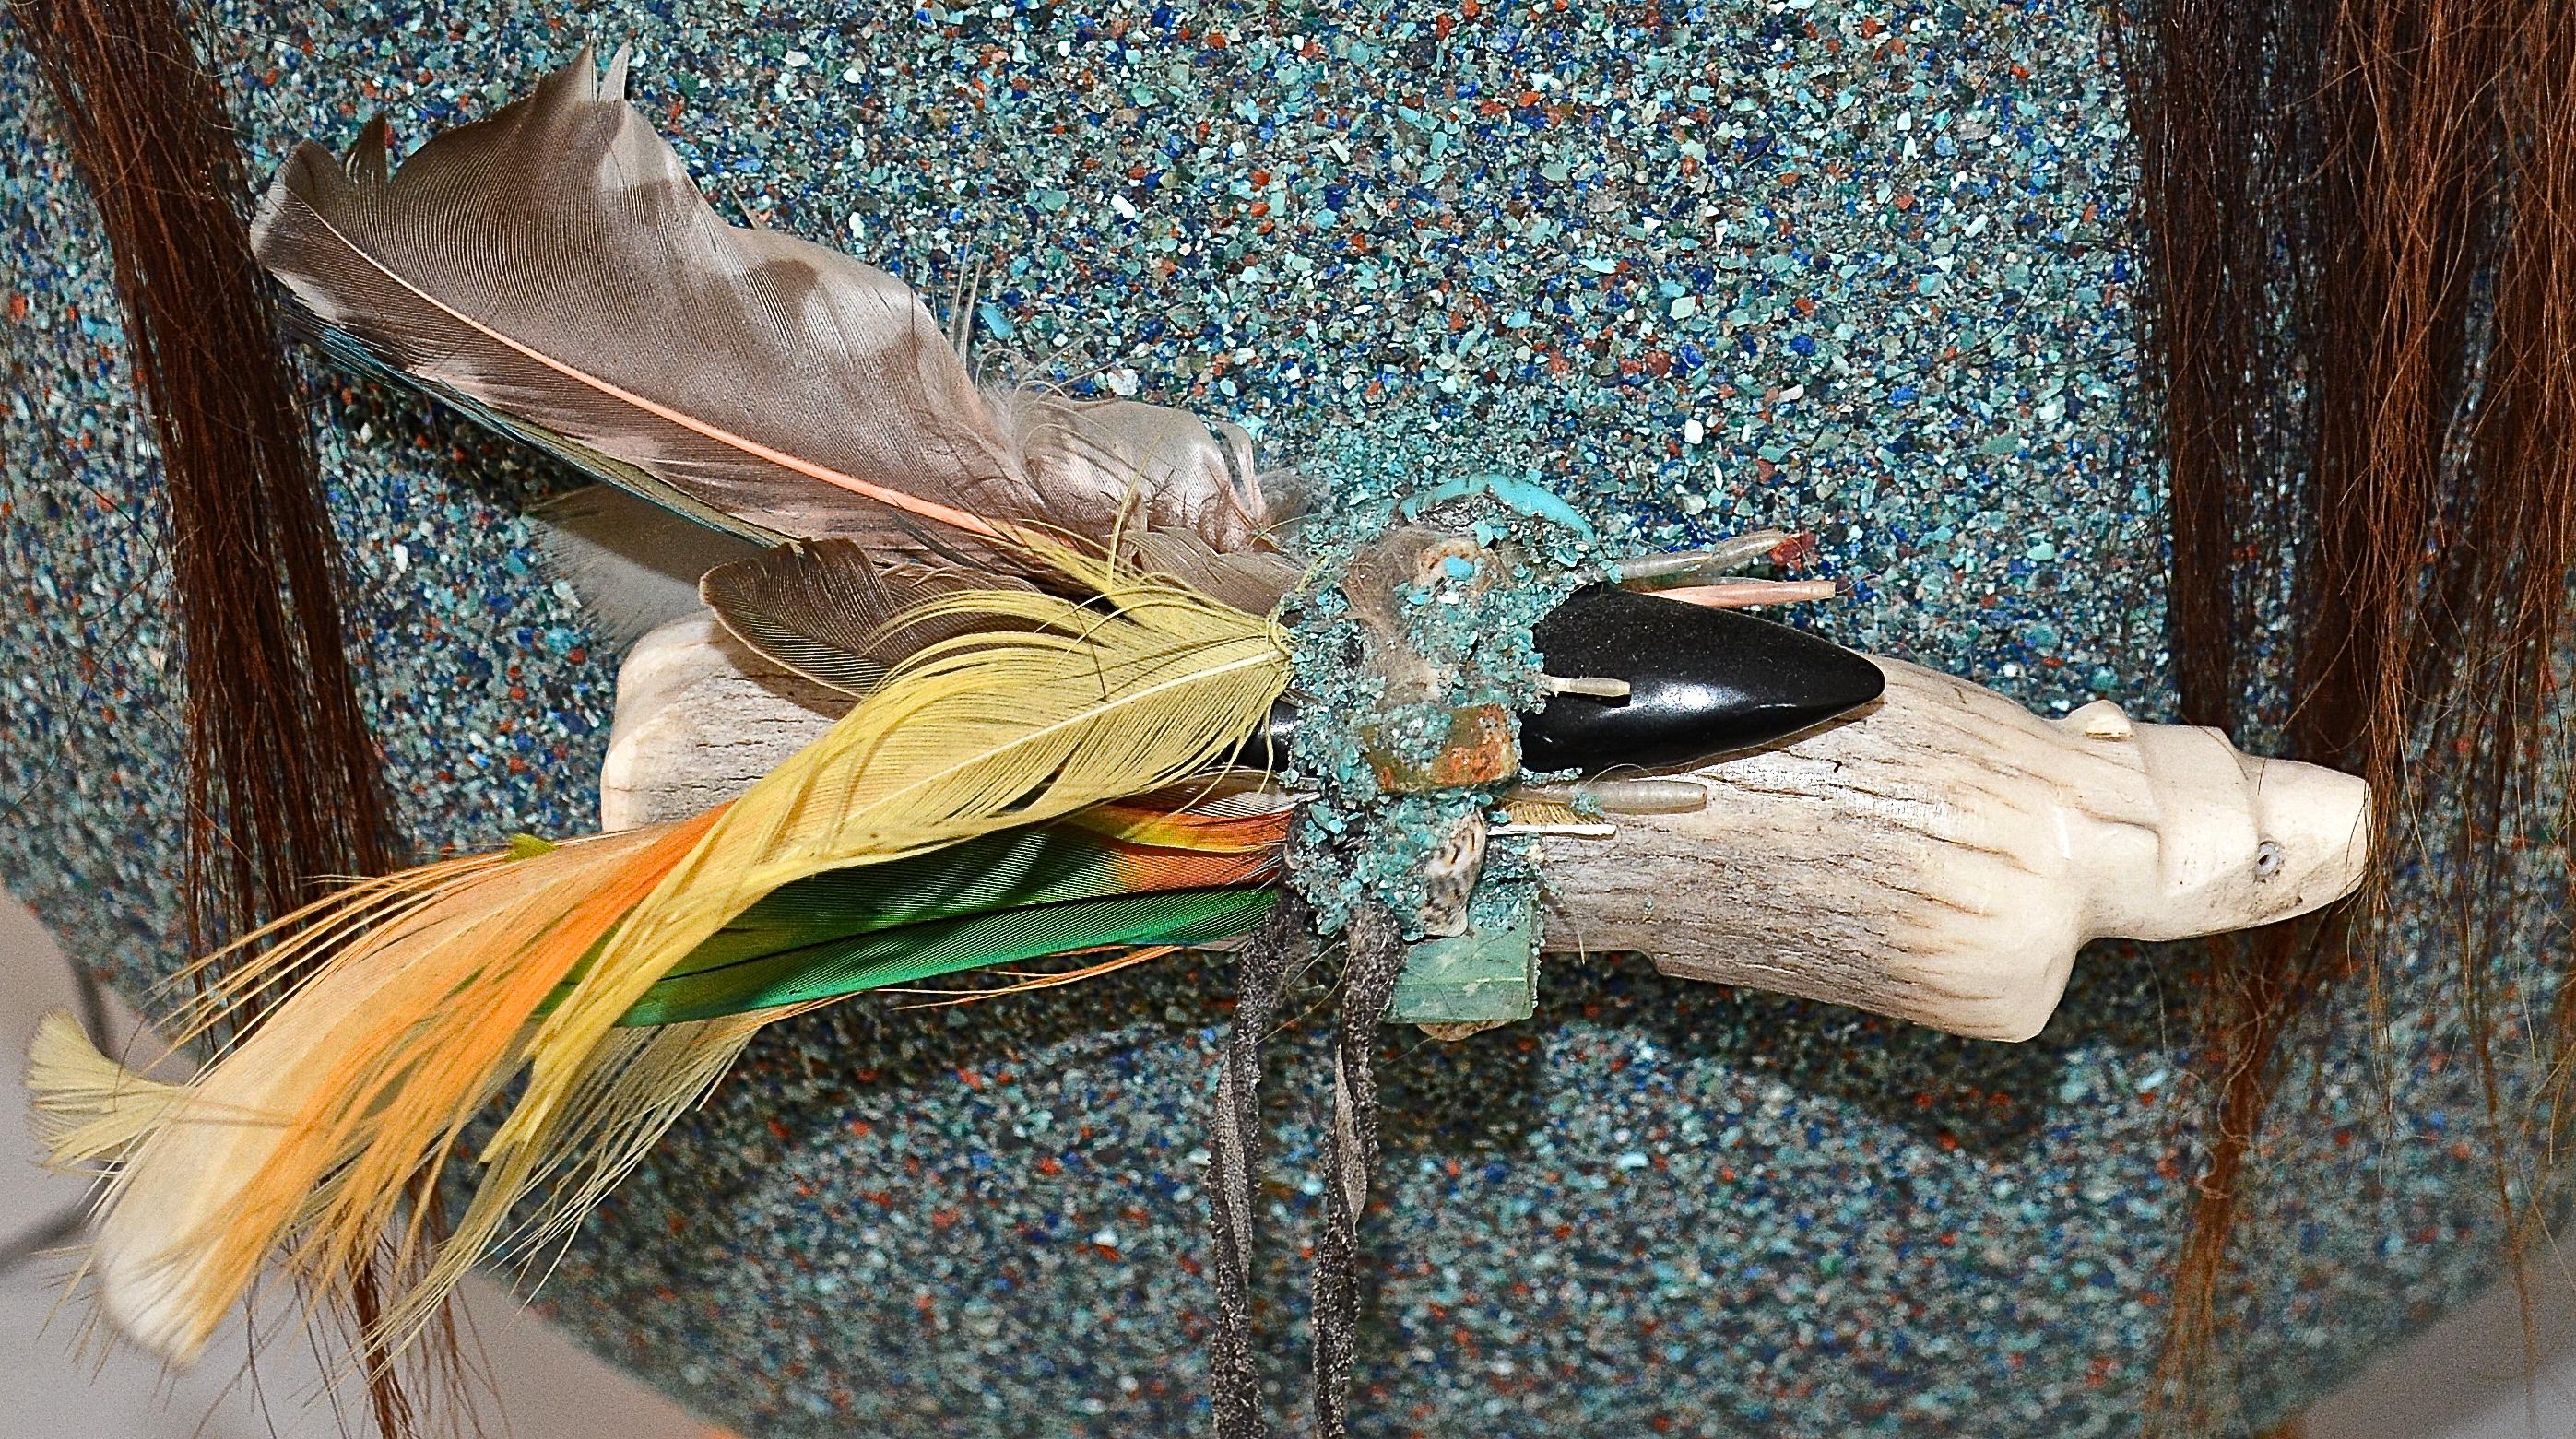 Fetish Bowl
1998
Marvelita Phillips ( 1949 - )
Ceramic pot, pine tar, turquoise, azurite, shells, coral, deer antlers, feathers, jet, horsehair, deer sinew, leather.

A truly magnificent Fetish Bowl appearing in near pristine original condition